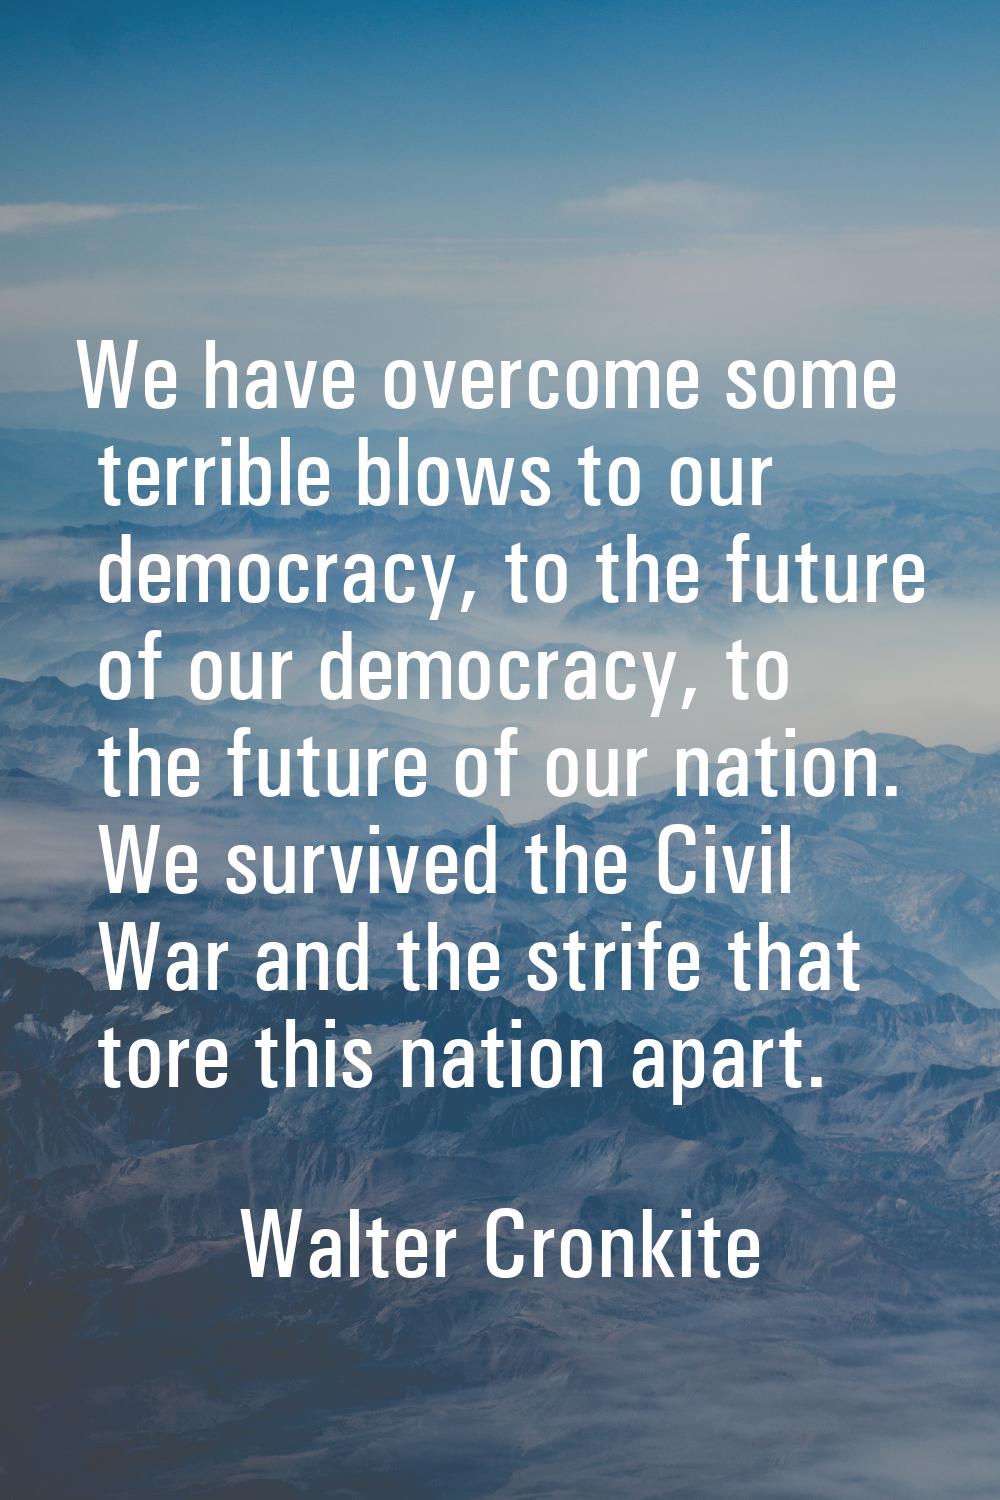 We have overcome some terrible blows to our democracy, to the future of our democracy, to the futur